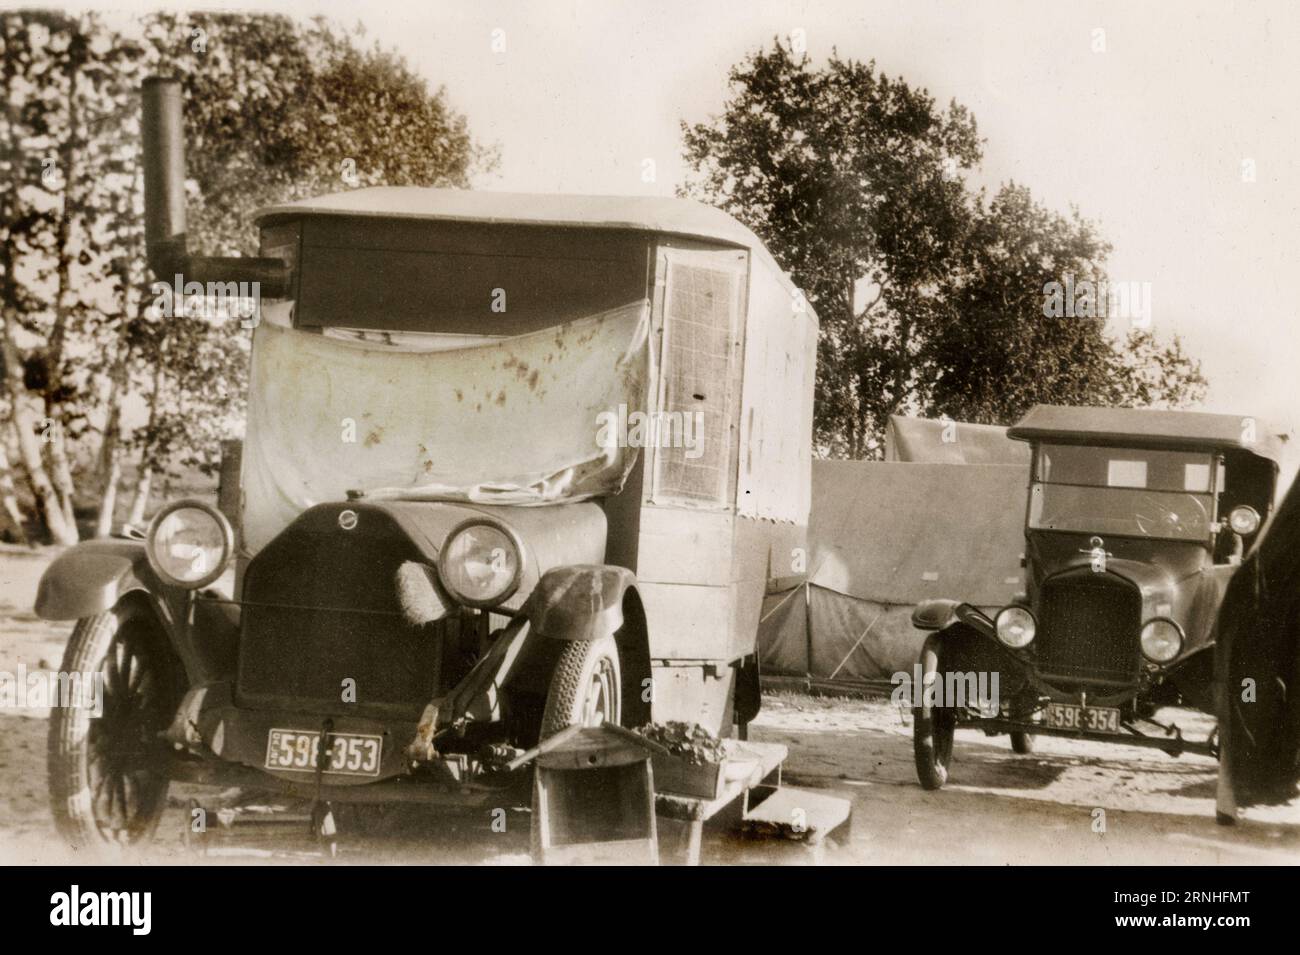 A 1920s photograph of a Studebaker reconfigured by its California owner into a camping and traveling vehicle, equipped with a wood-burning store. Stock Photo